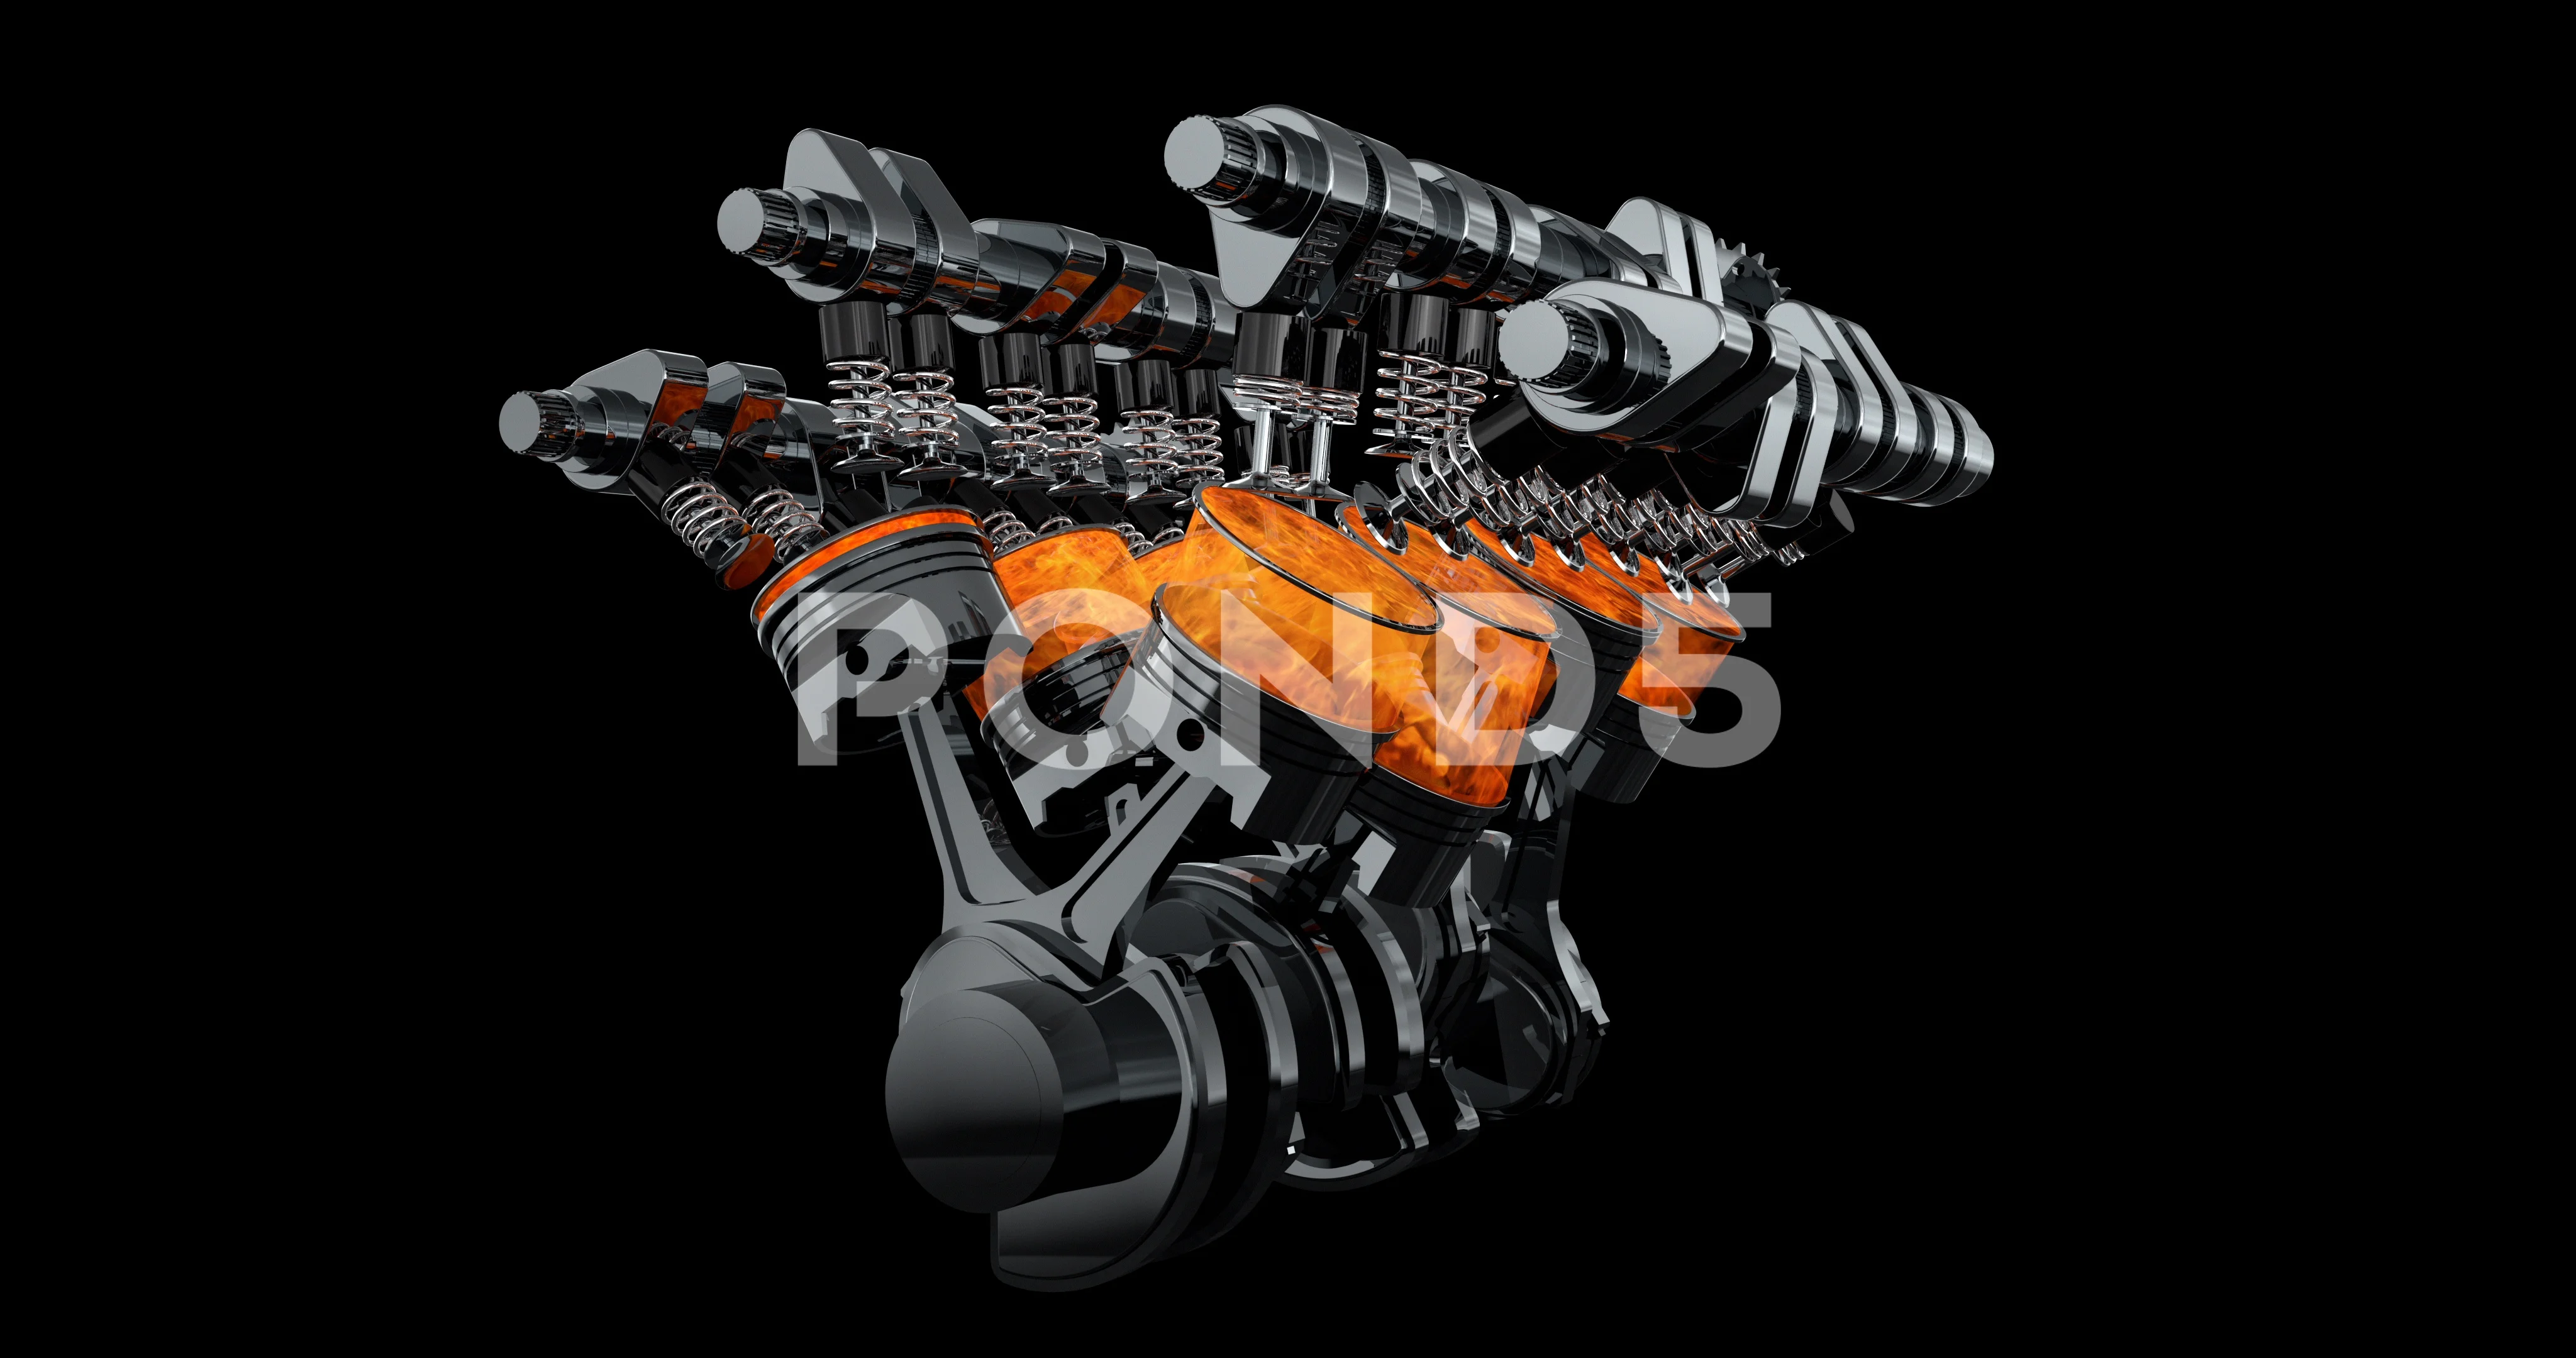 Rotating V8 Engine Animation With Explos... | Stock Video | Pond5